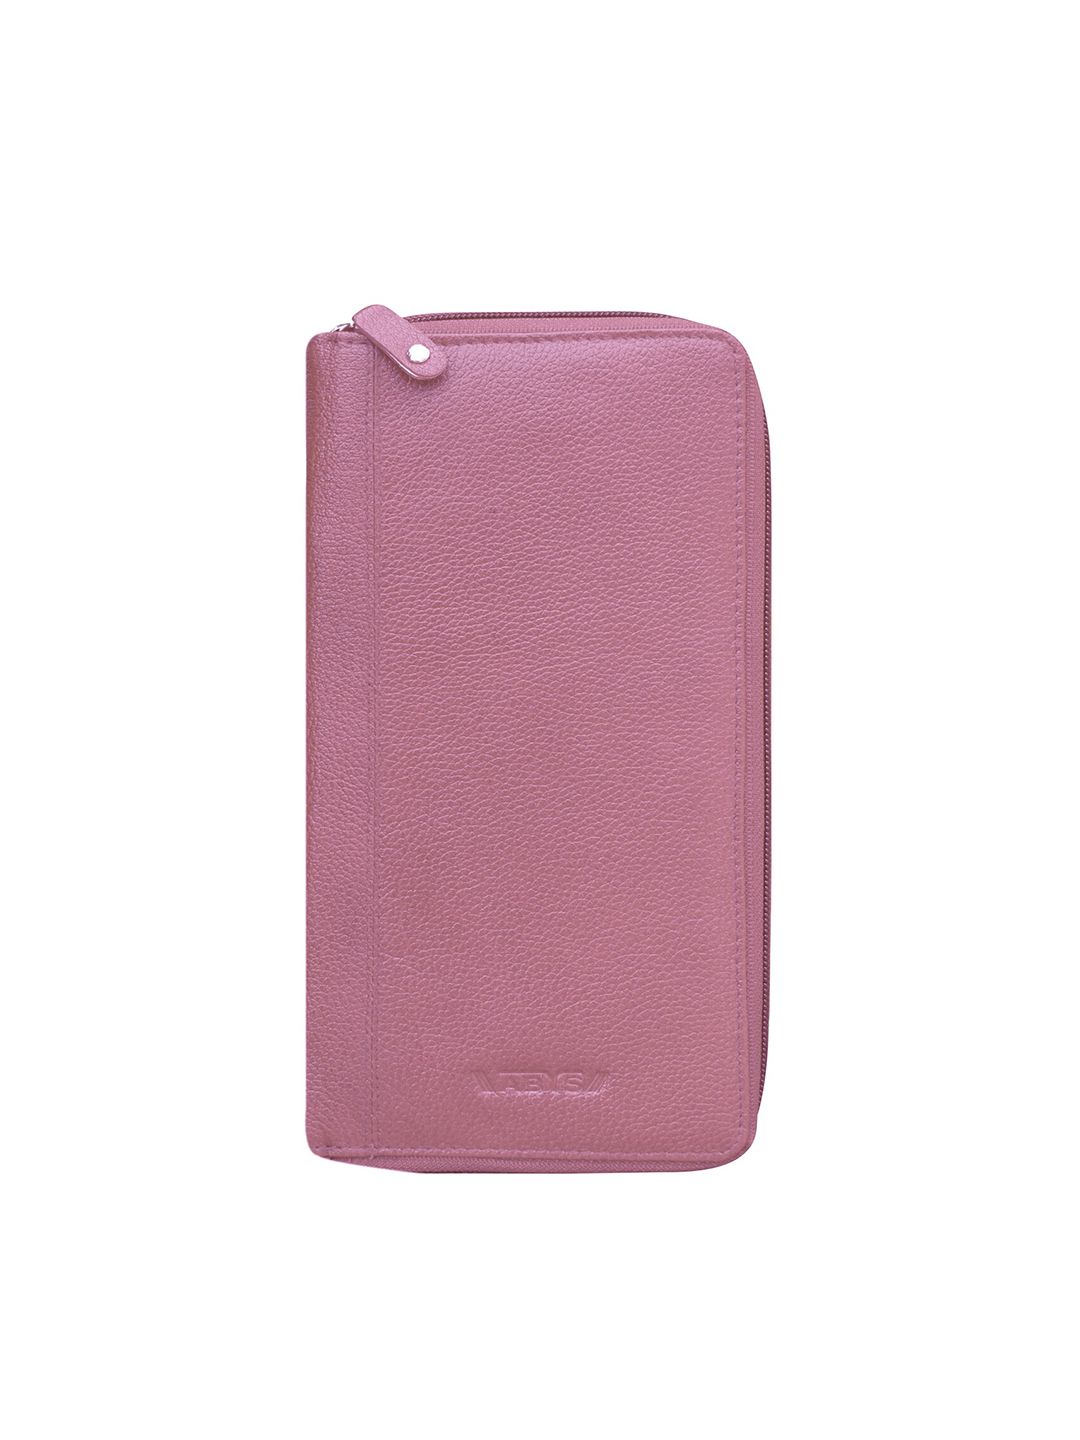 ABYS Unisex Pink Solid Travel Long Passport Holder Wallet Price in India